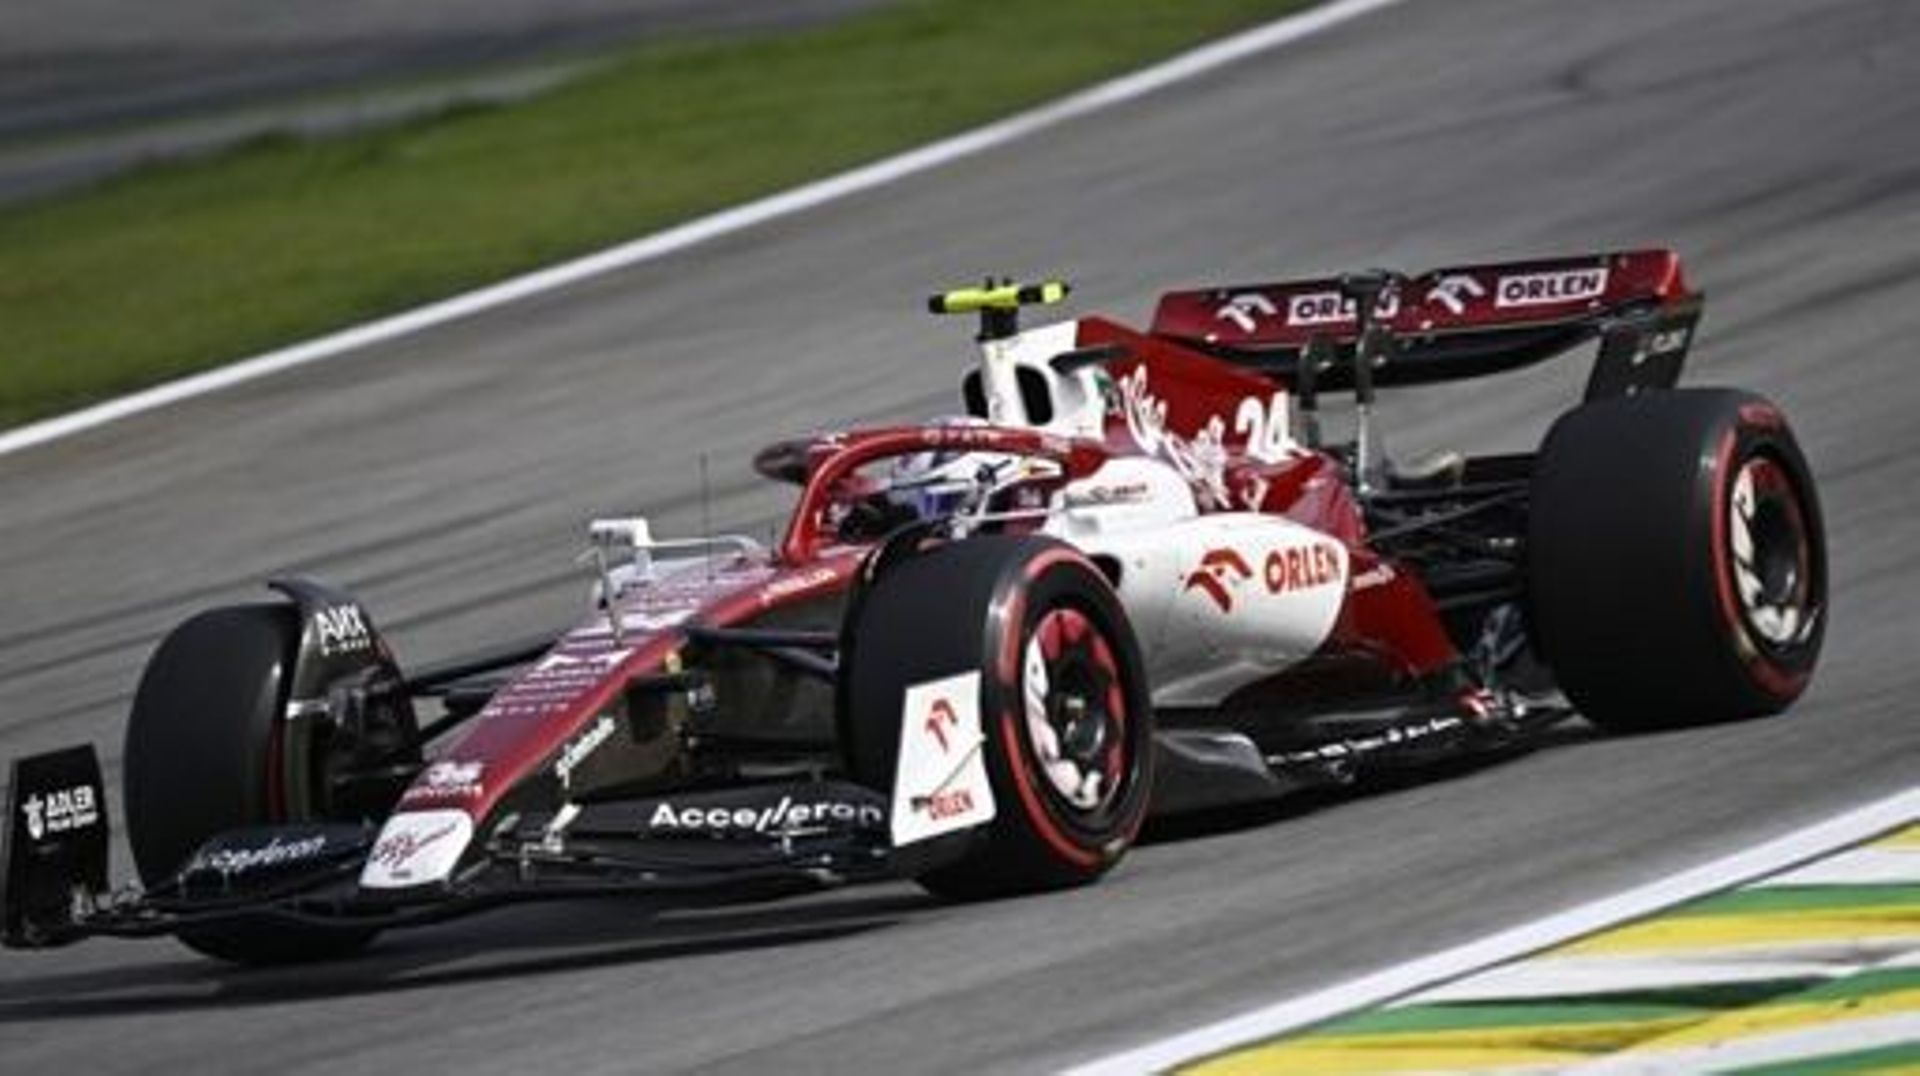 Alfa Romeo Chinese driver Zhou Guanyu races during the Formula One Brazil Grand Prix at the Autodromo Jose Carlos Pace racetrack, also known as Interlagos, in Sao Paulo, Brazil, on November 13, 2022.    MAURO PIMENTEL / AFP